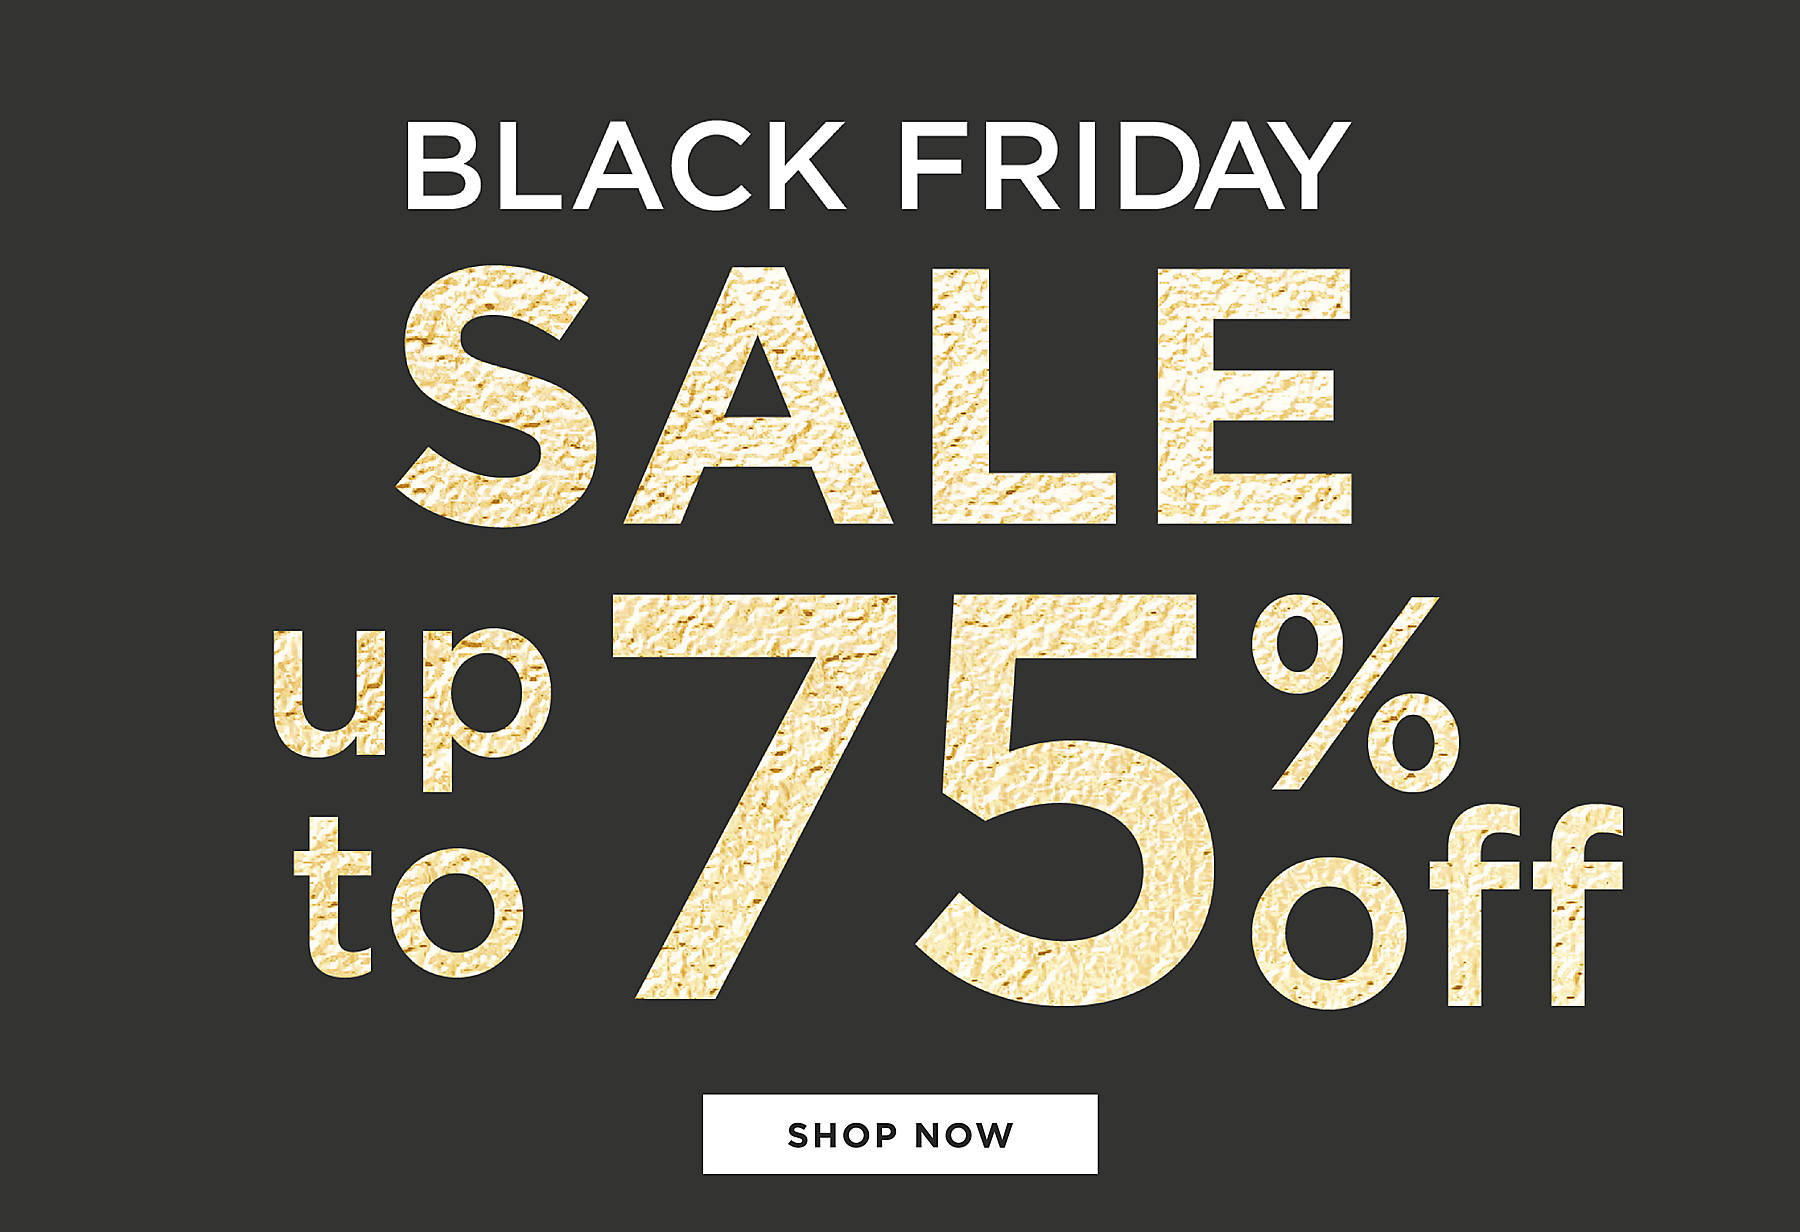 Black Friday Sale Up to 75% Off Shop Now 